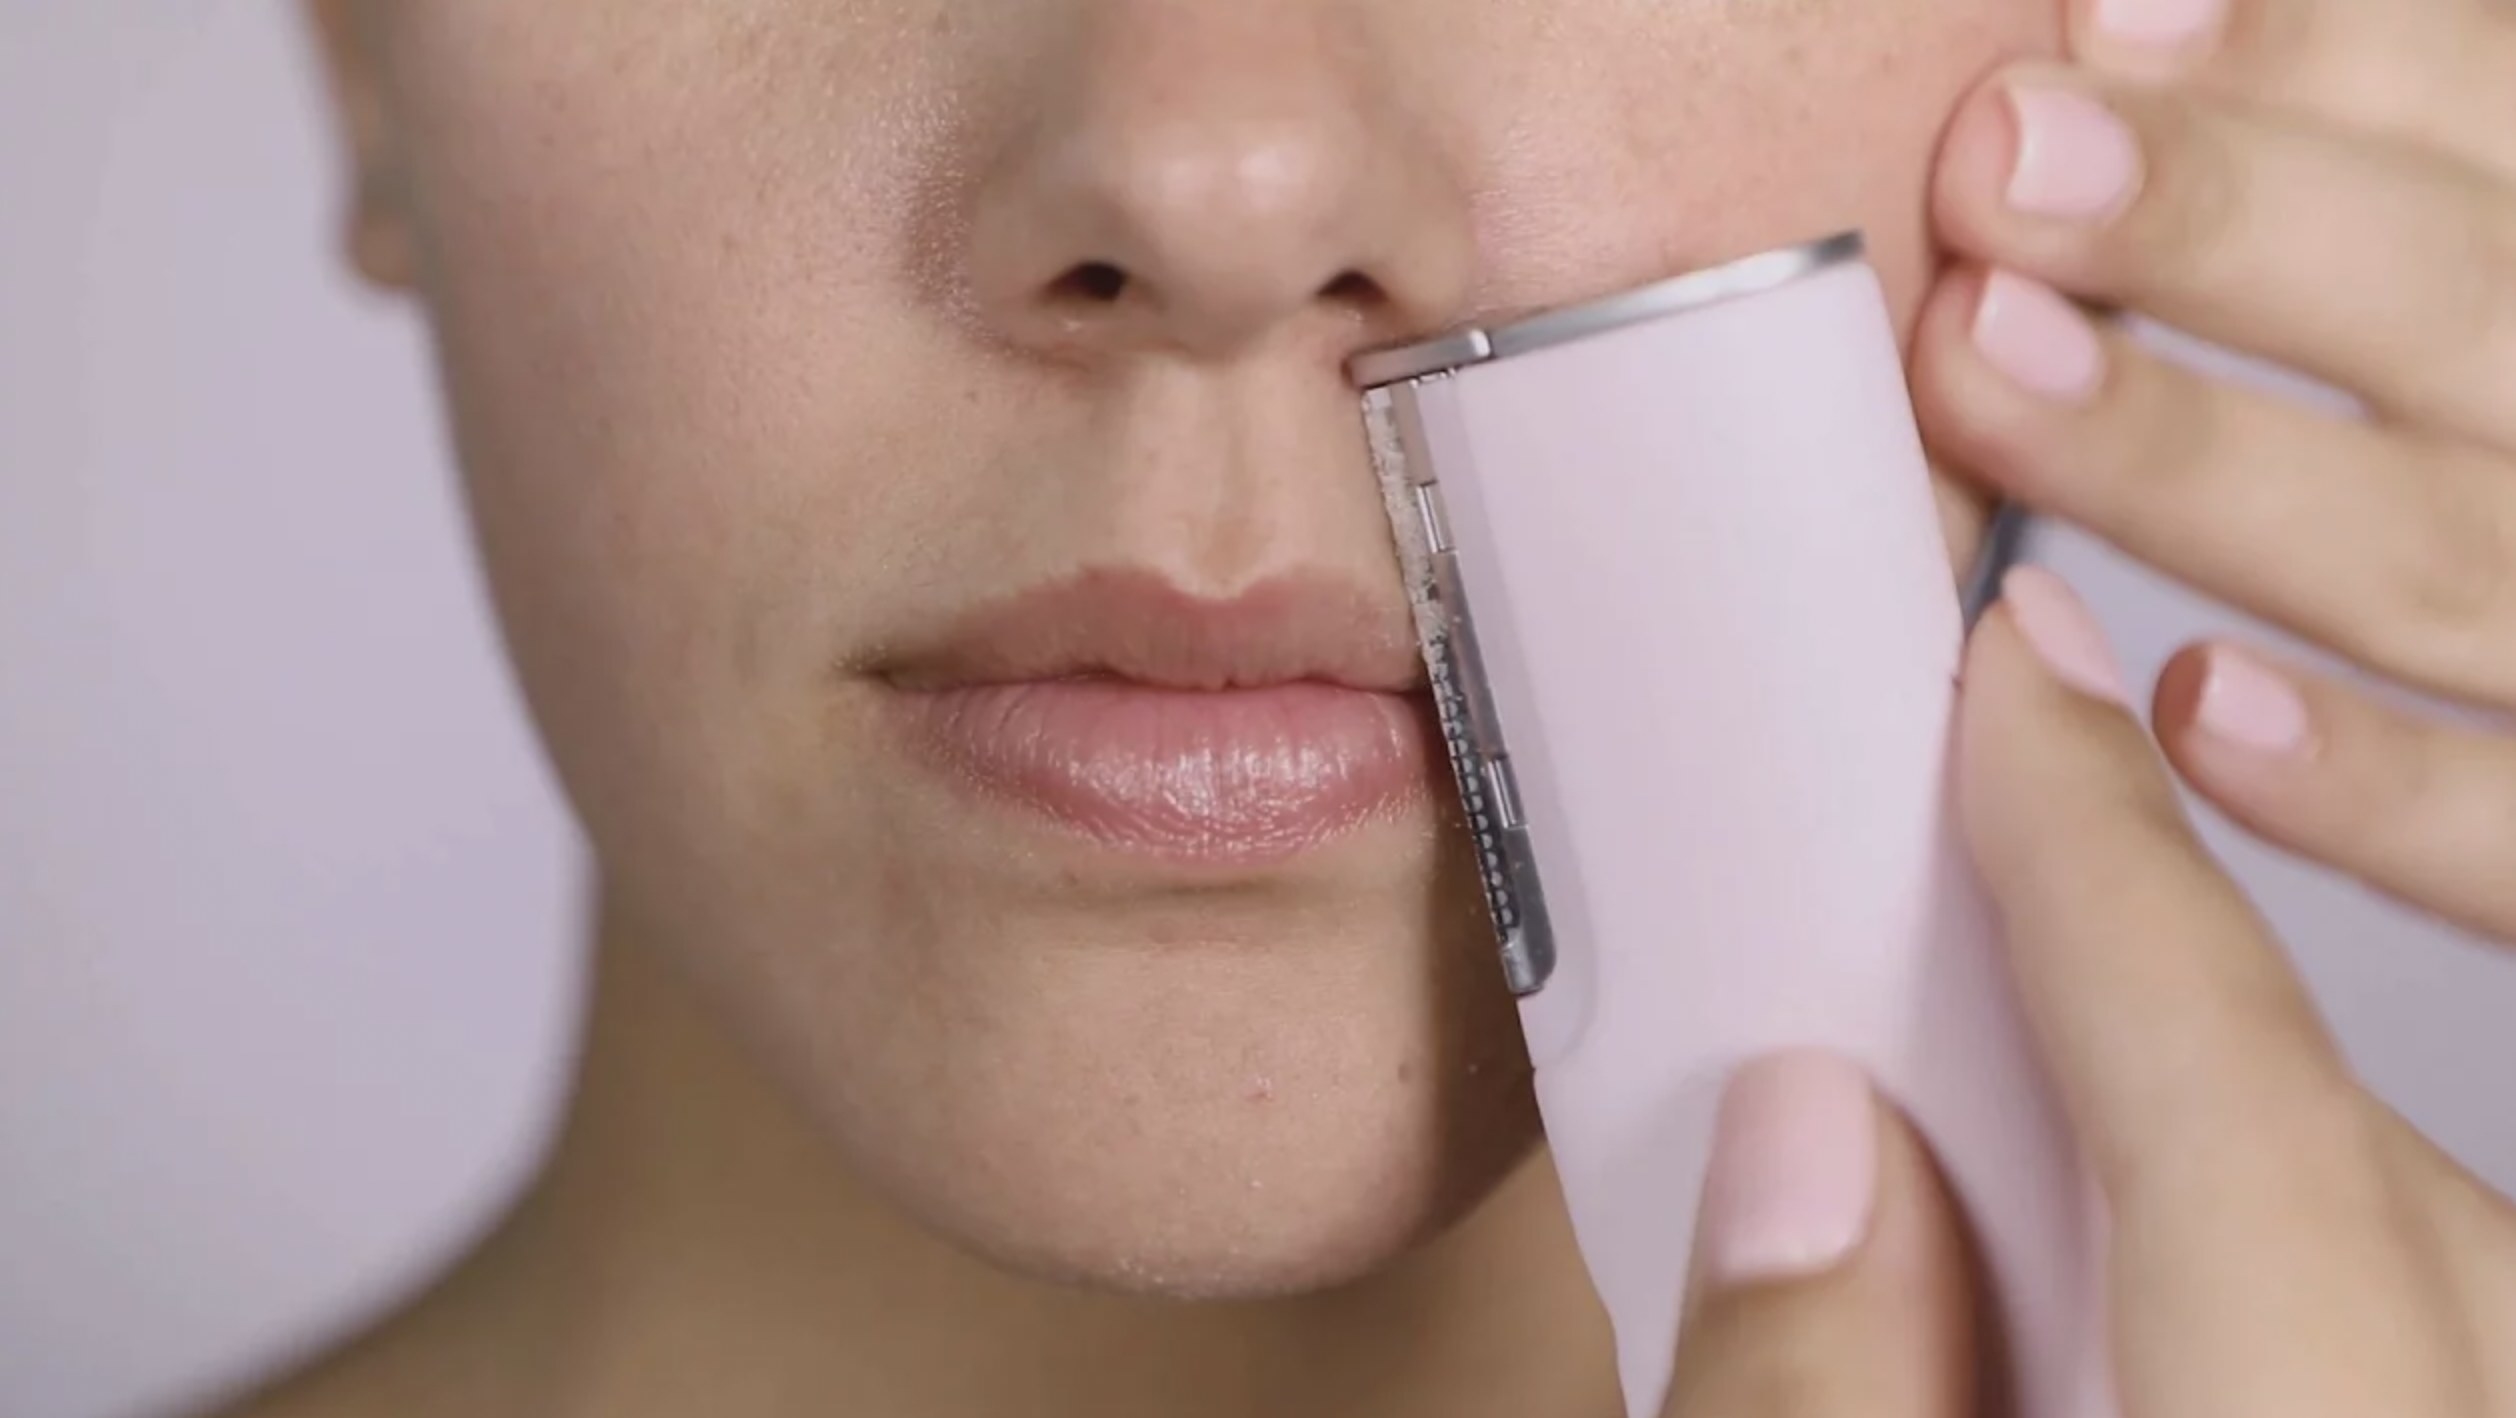 Model using the dermaplaning device to shave away peach fuzz above lip